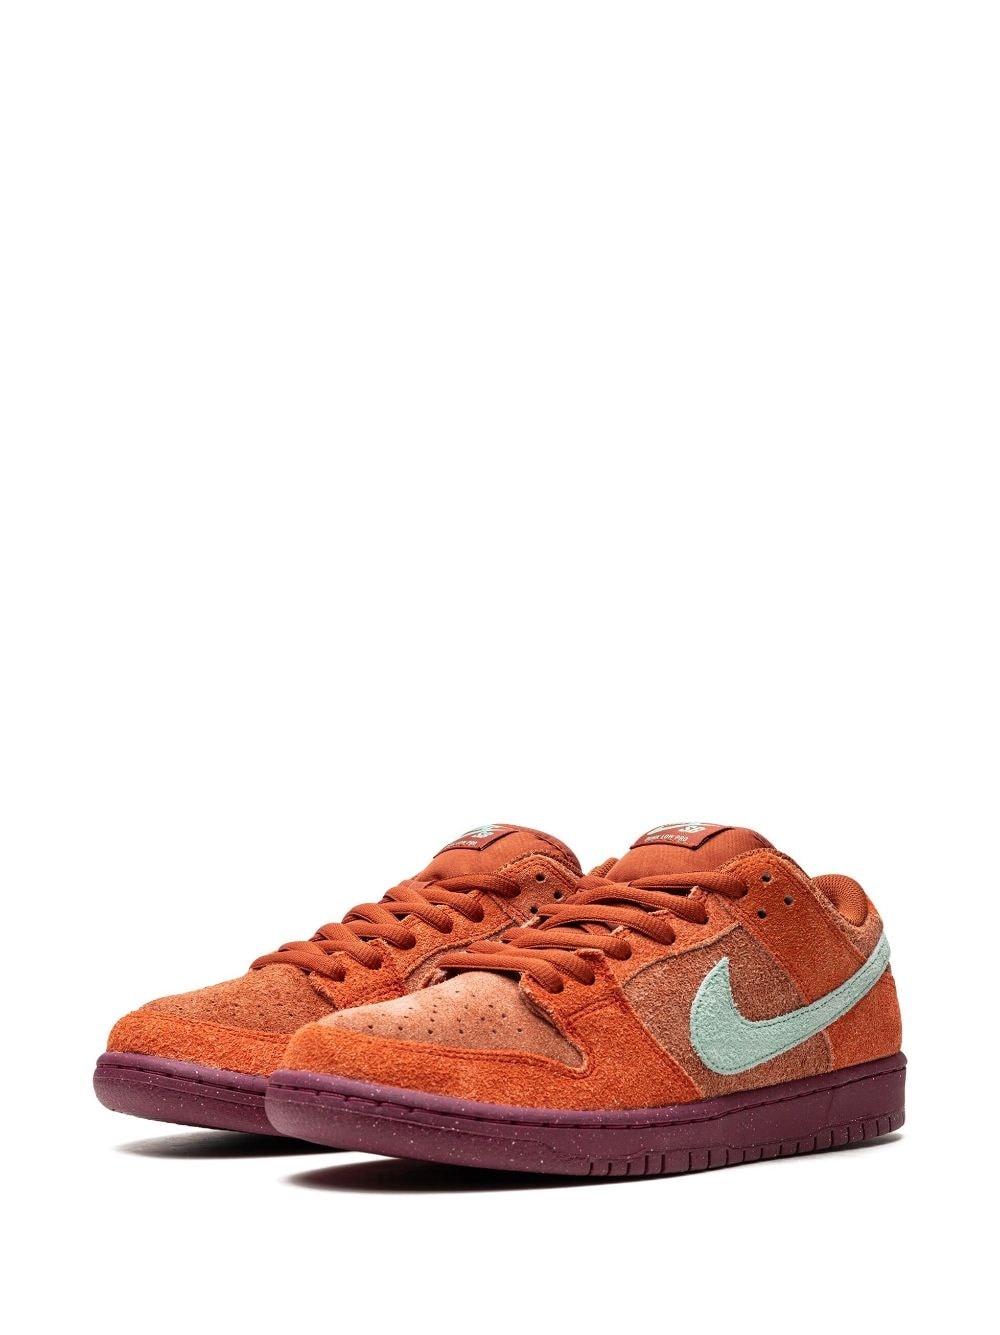 SB Dunk Low Pro Prm "Mystic Red" sneakers - 4